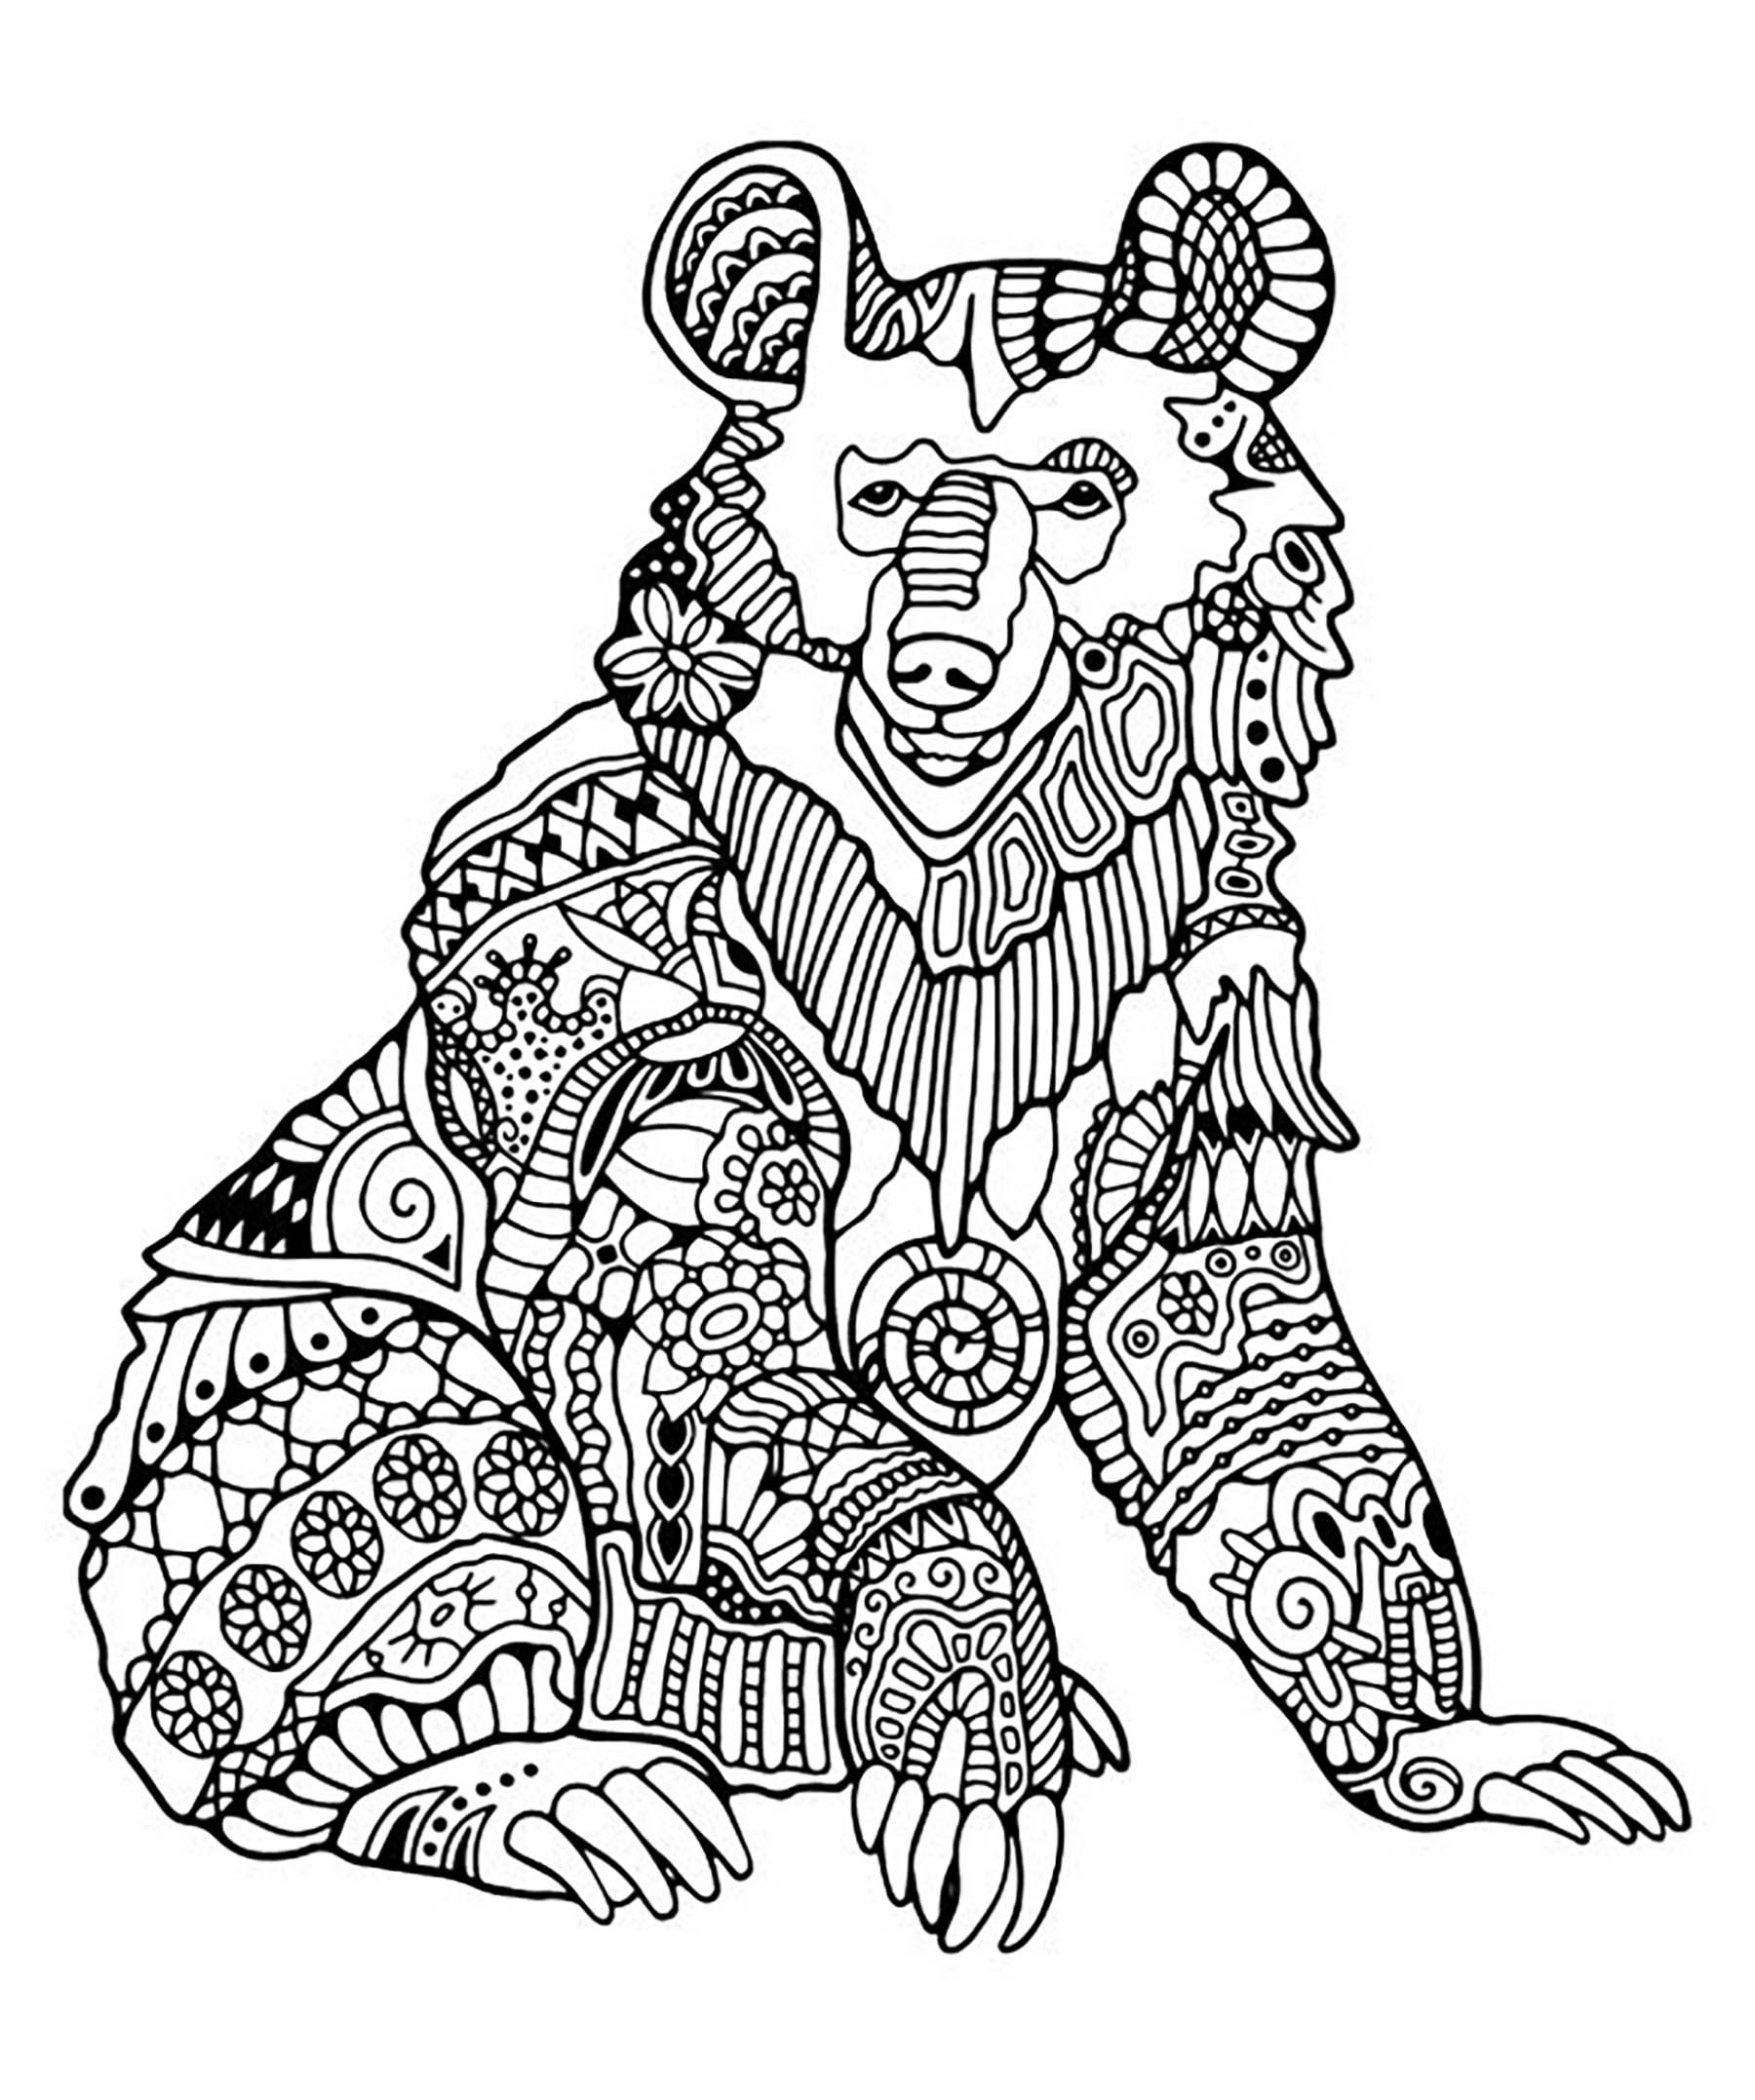 Bears Coloring Pages Bear 1 Bears Adult Coloring Pages